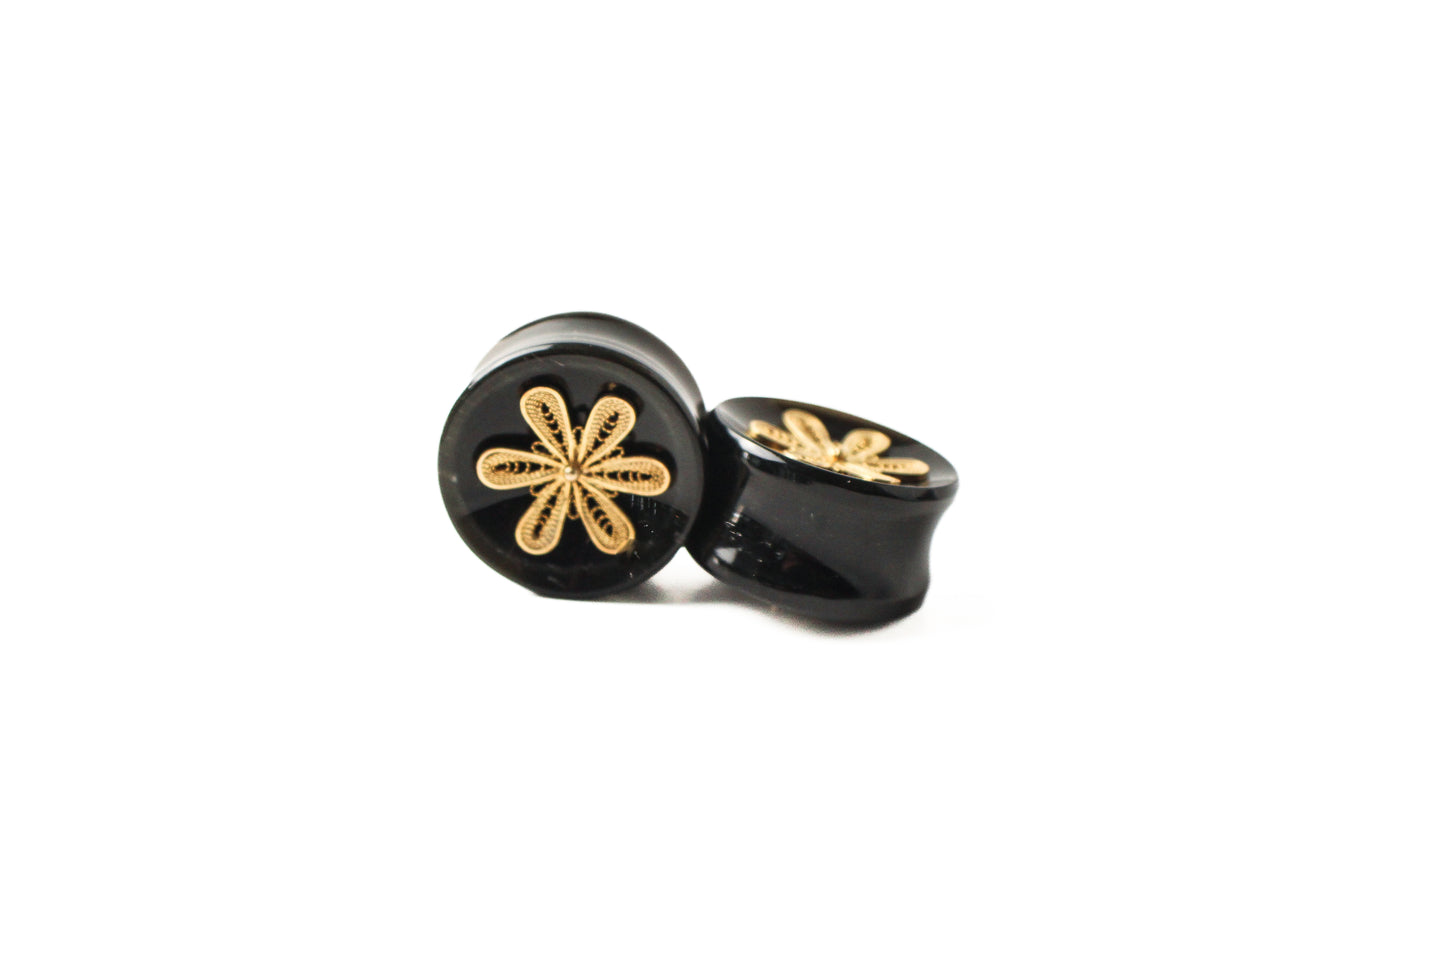 7/8" (22mm) - Gorilla Glass Limited Filigrana Plugs - Concave Obsidian + Gold Inlay